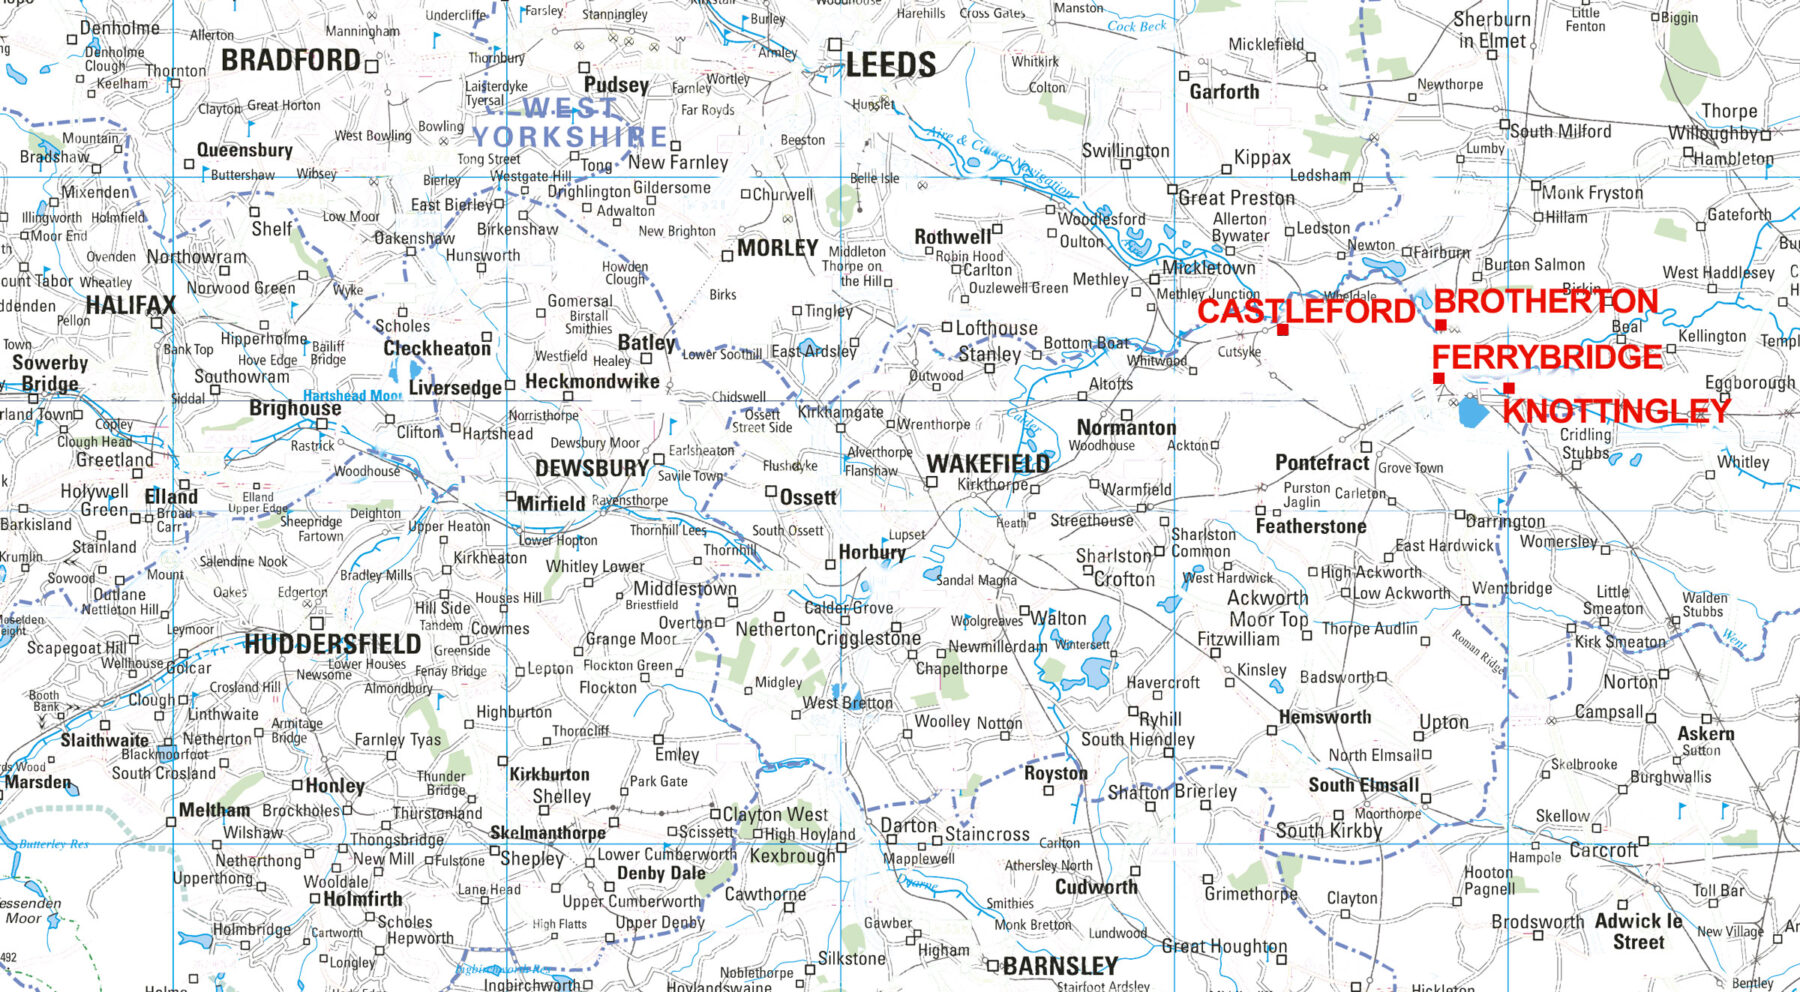 Area in Yorkshire where Shepherds lived